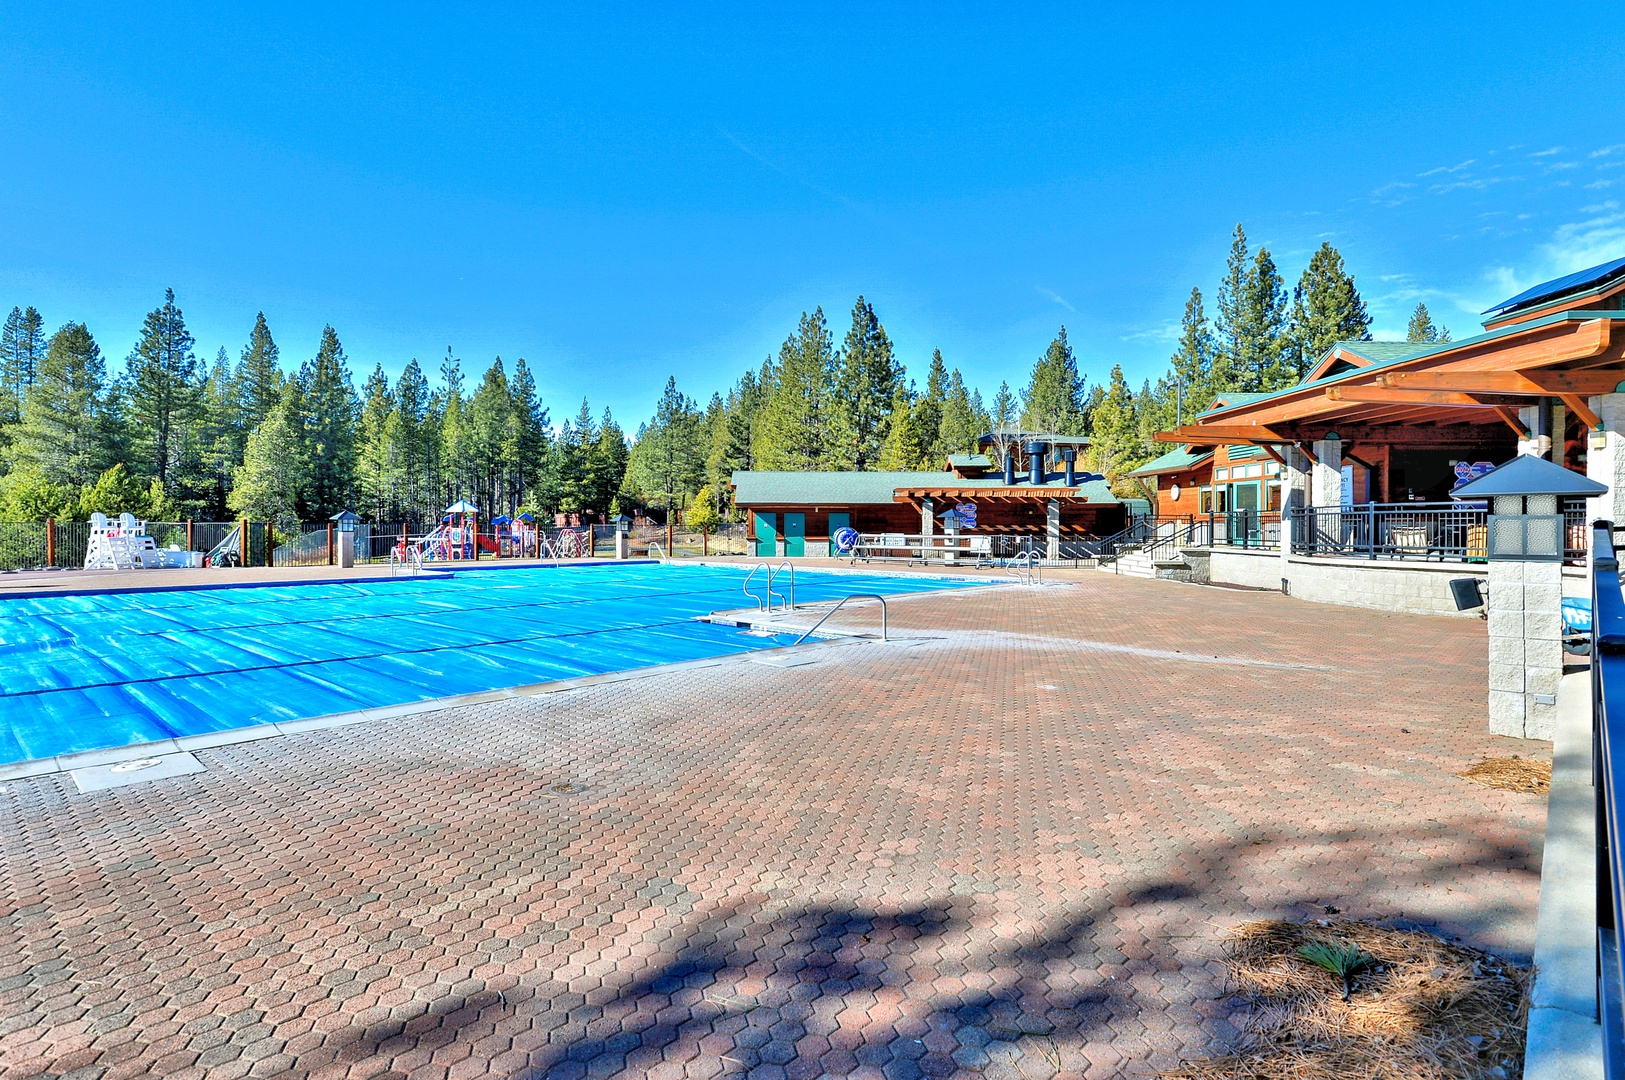 Alternate View of the Lap Pool at the Rec Center: Tahoe Donner Meadow View Cabin